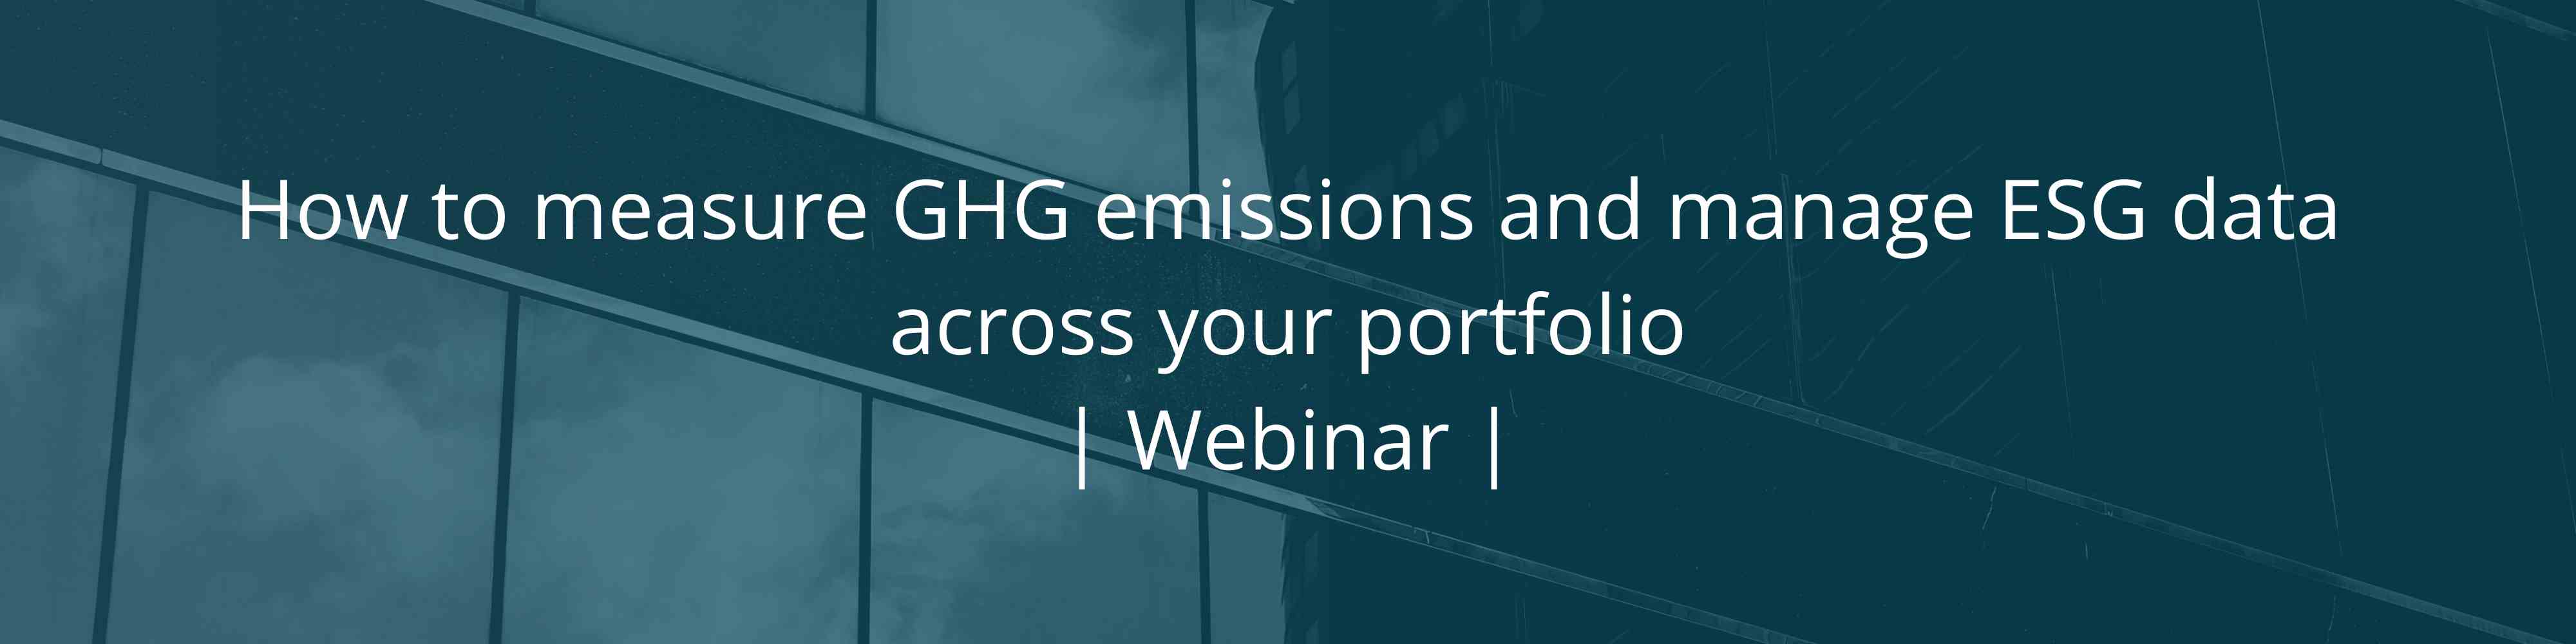 How to measure GHG emissions and manage ESG data across your portfolio